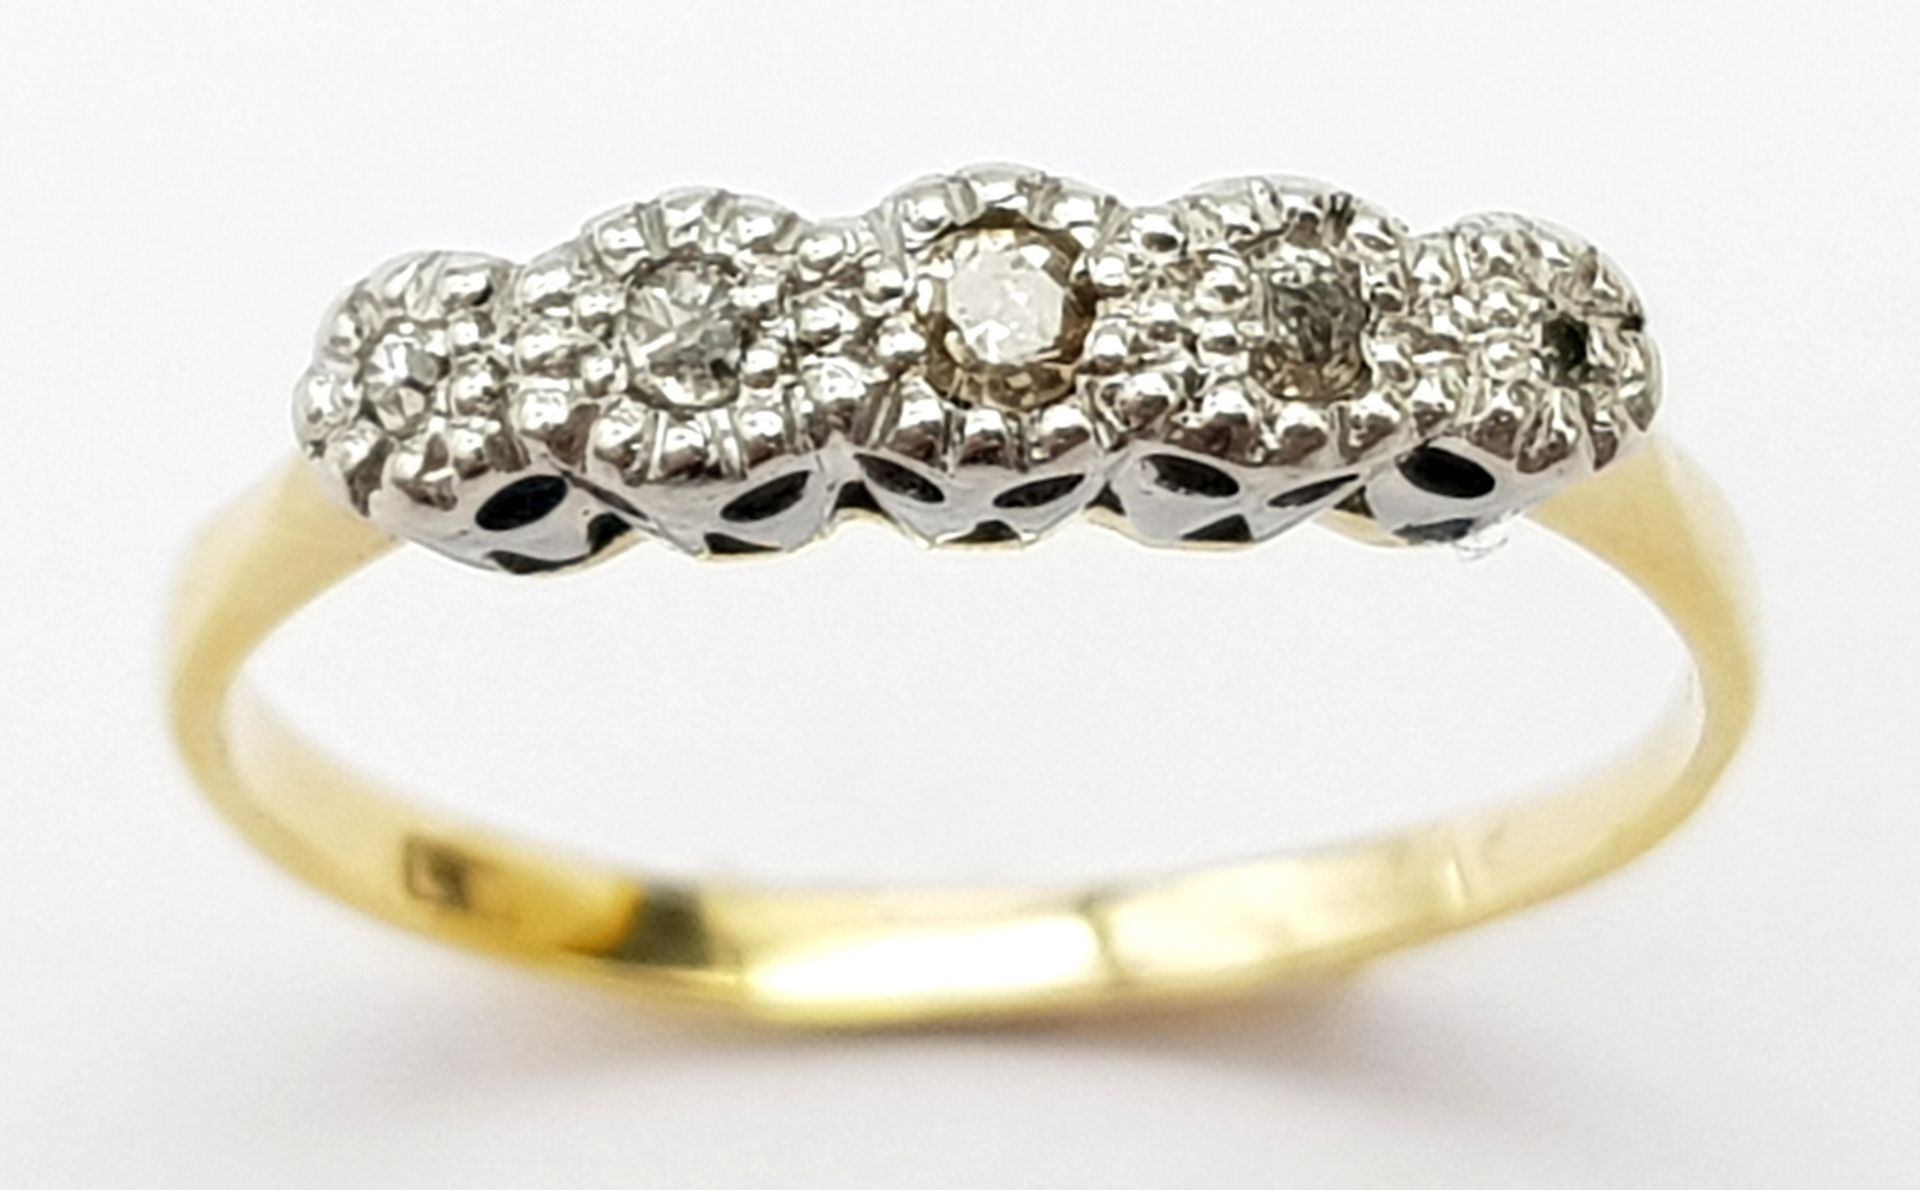 AN 18K YELLOW GOLD VINTAGE DIAMOND 5 STONE RING, Size J, 1.6g total weight. Ref: SC 8066 - Image 2 of 5